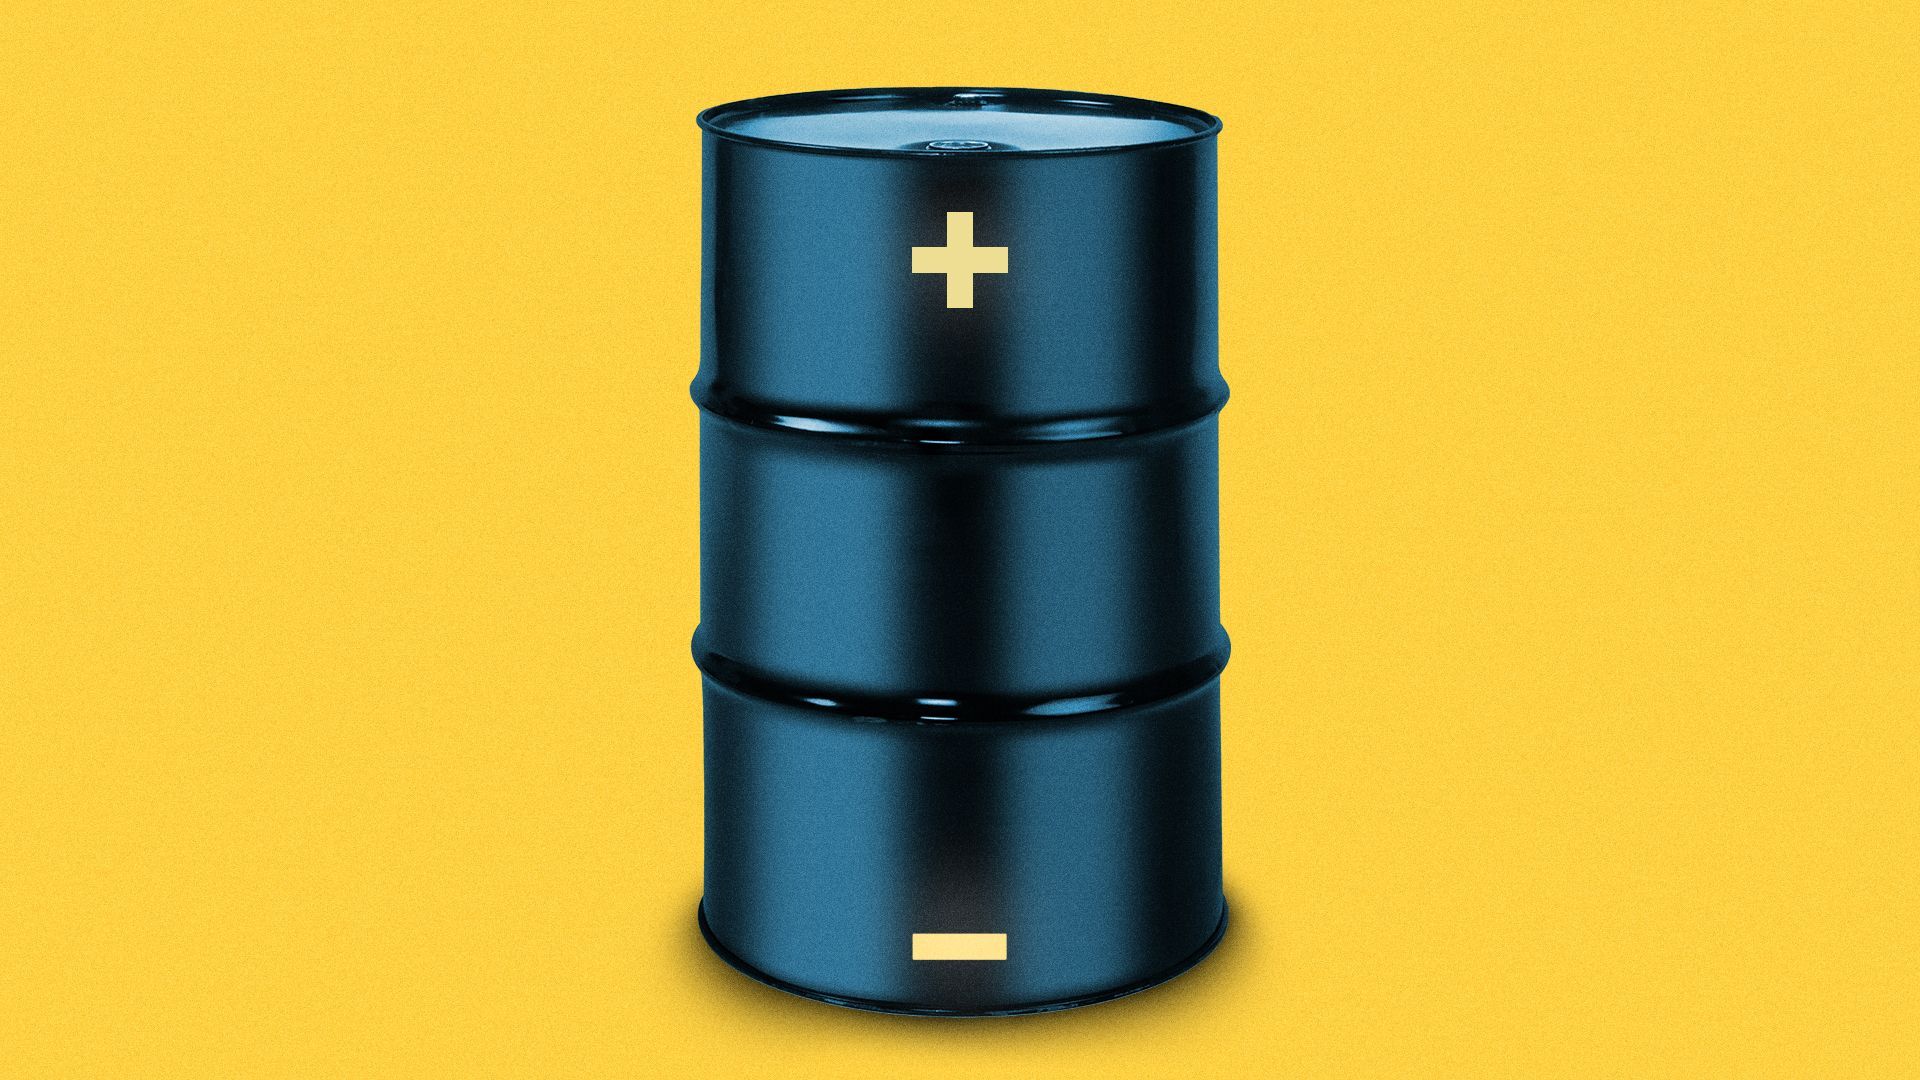 Illustration of an oil barrel with a positive and negative sign on either end, like a battery.